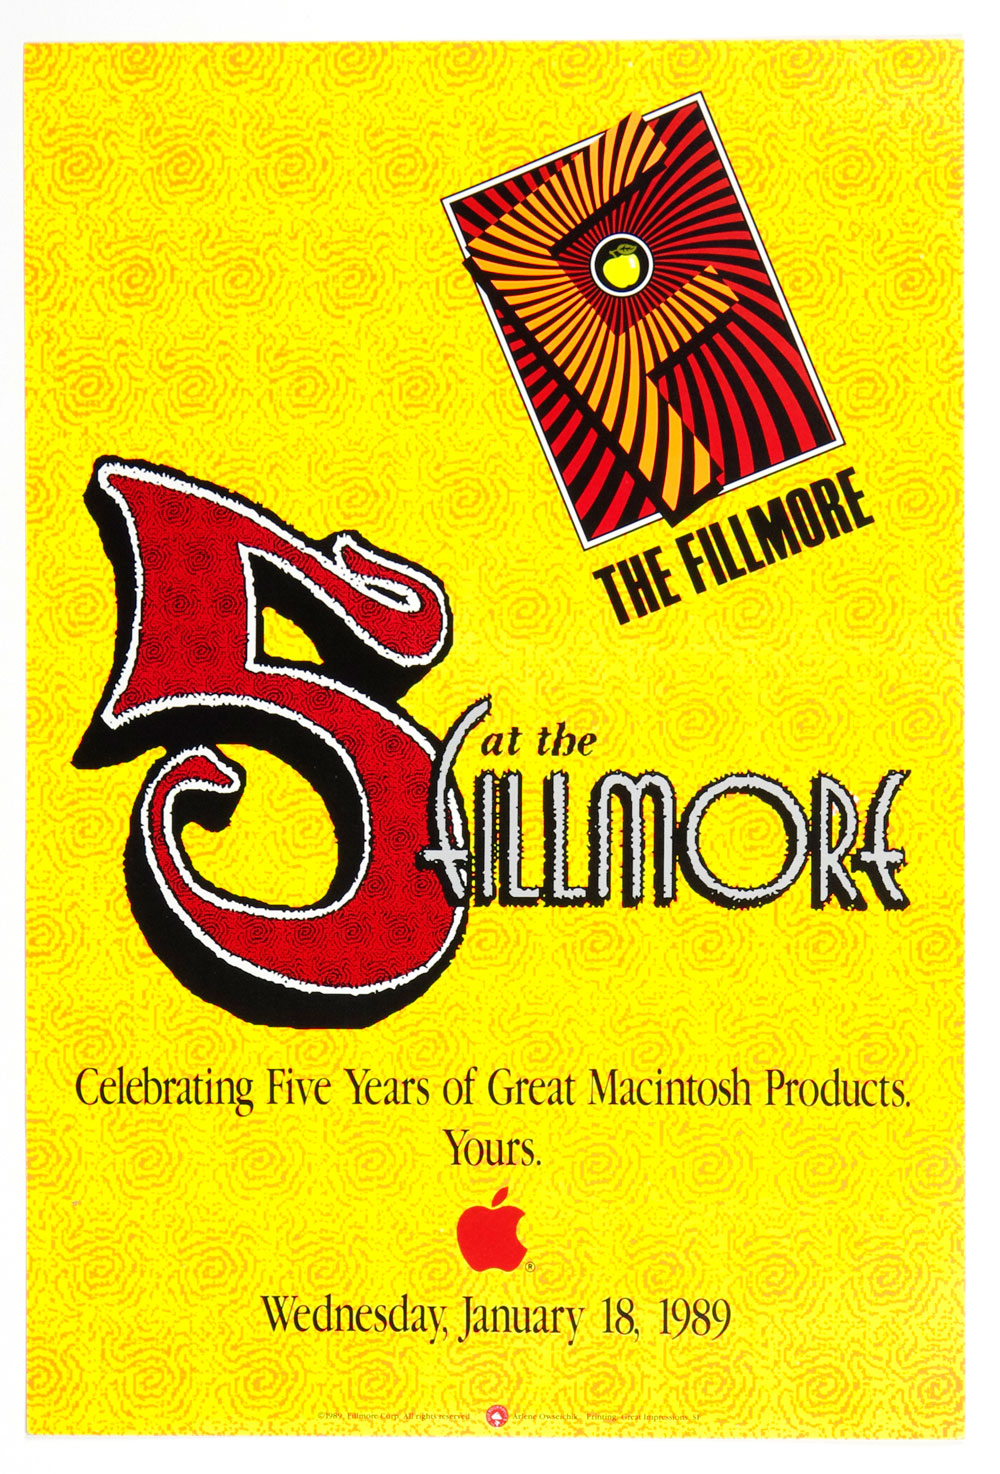 Macintosh Products Celebrating Five Years of Great 1996 Jan 18 Fillmore San Francisco